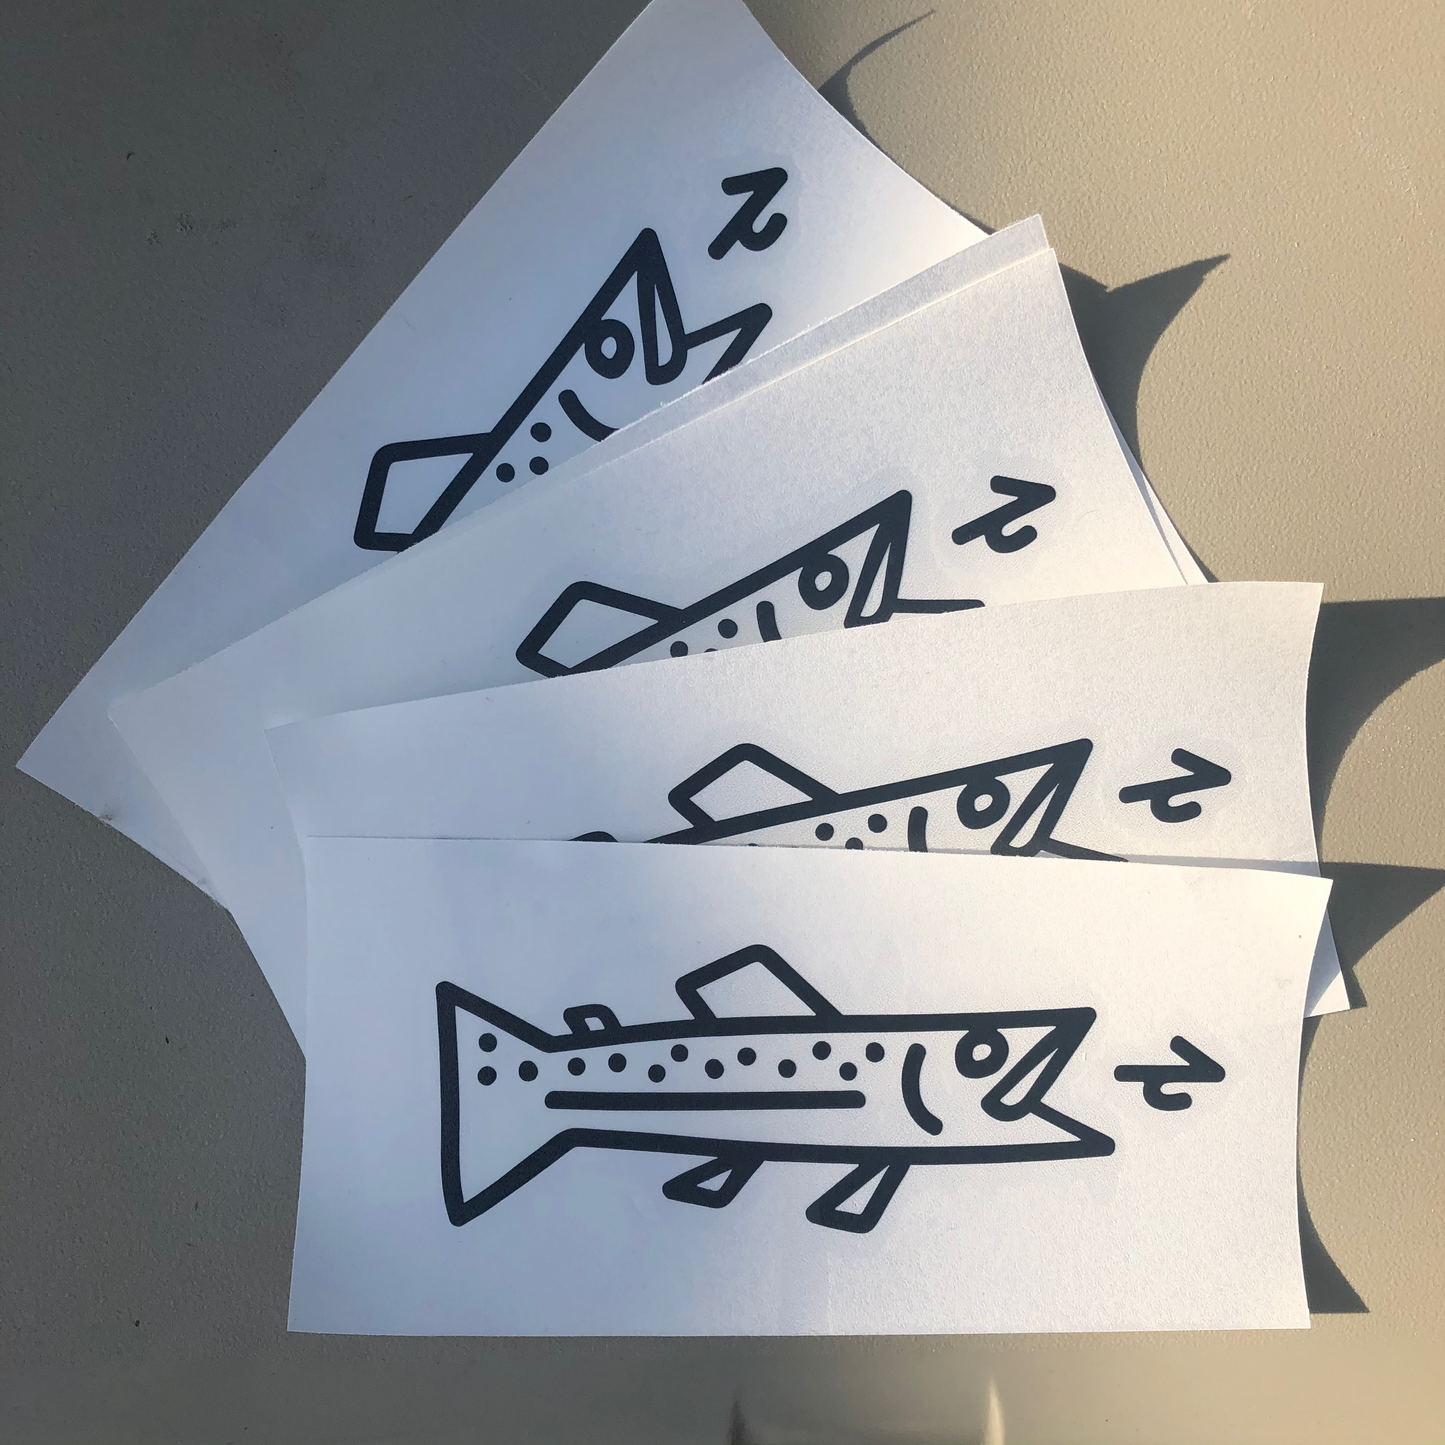 Thunderbird Design StudioIcon Trout Series - Transfer DecalsIcon Trout Series - Transfer Decals
6" Transfer decals are perfect to personalize your gear and whatever else you can stick it to. 
10% of all proceeds are donated to conservation efforts to help prot